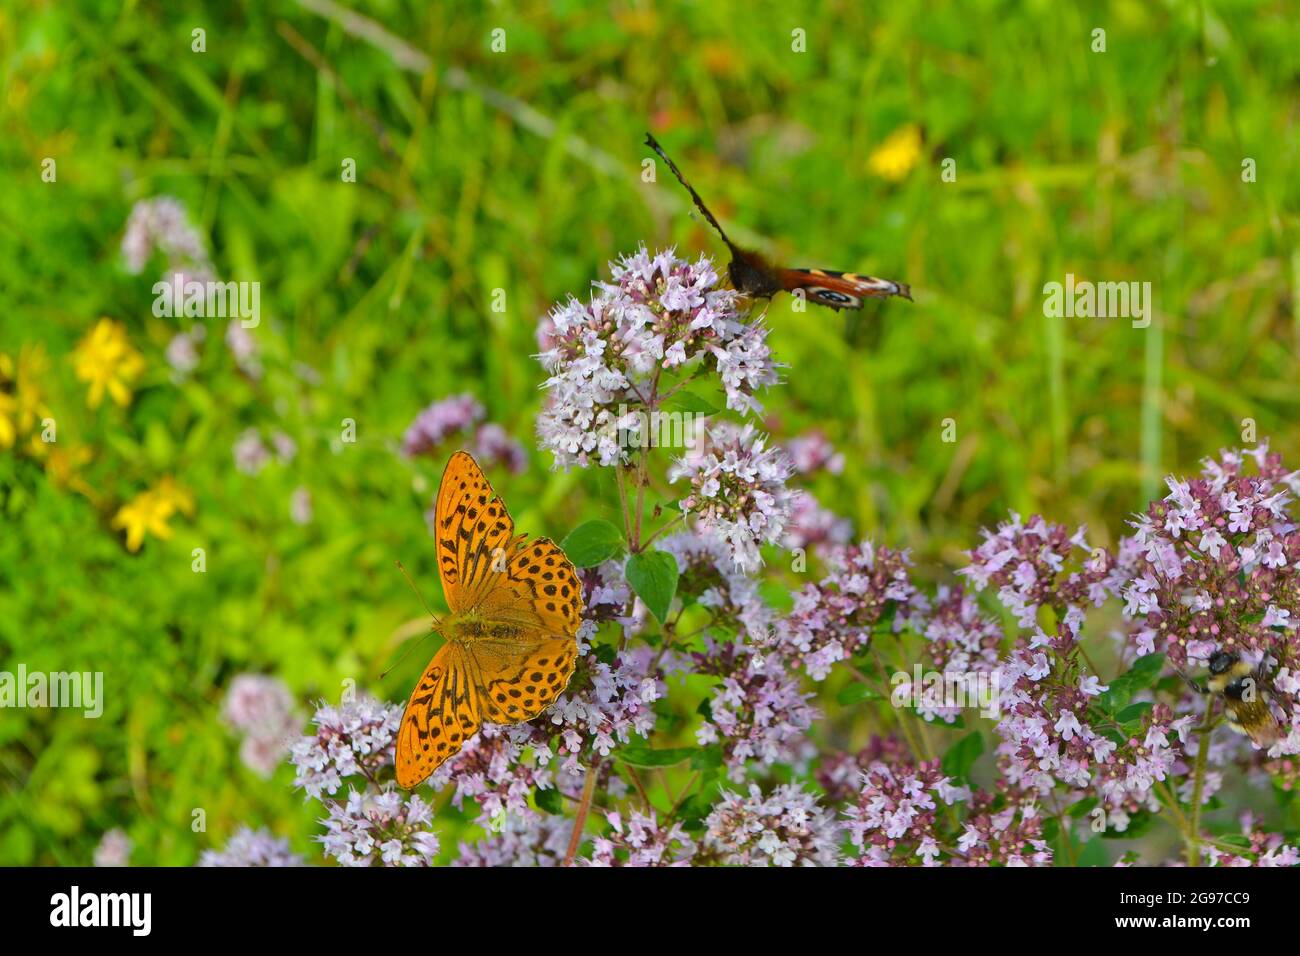 Peacock and male silver-washed fritillary butterflies on wild marjoram in rewilded patch near Charles Darwin's old house at Downe, Kent, England, UK Stock Photo